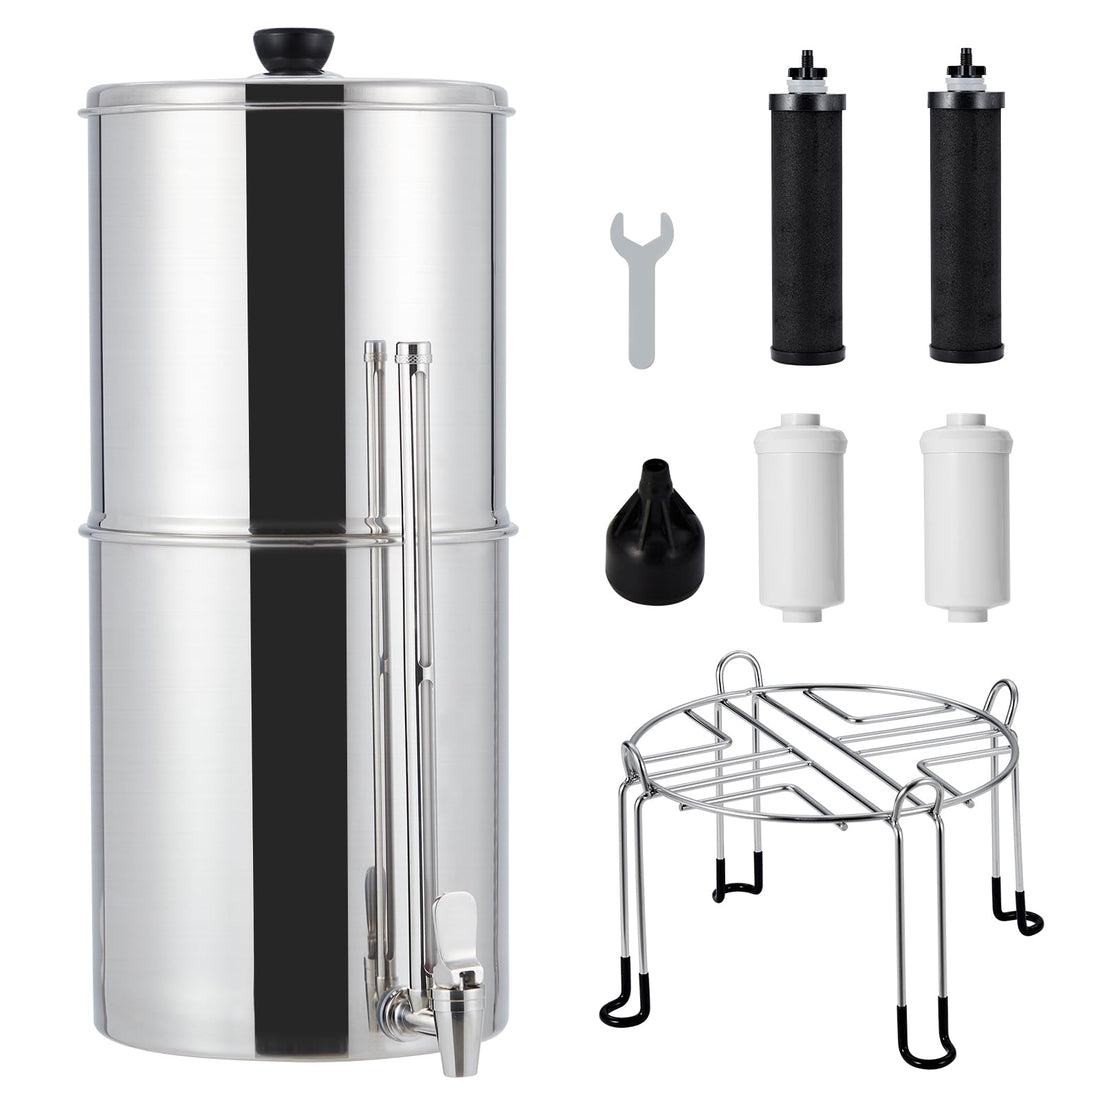 2.25G Stainless-Steel Gravity Water Filter System for Camping/Home